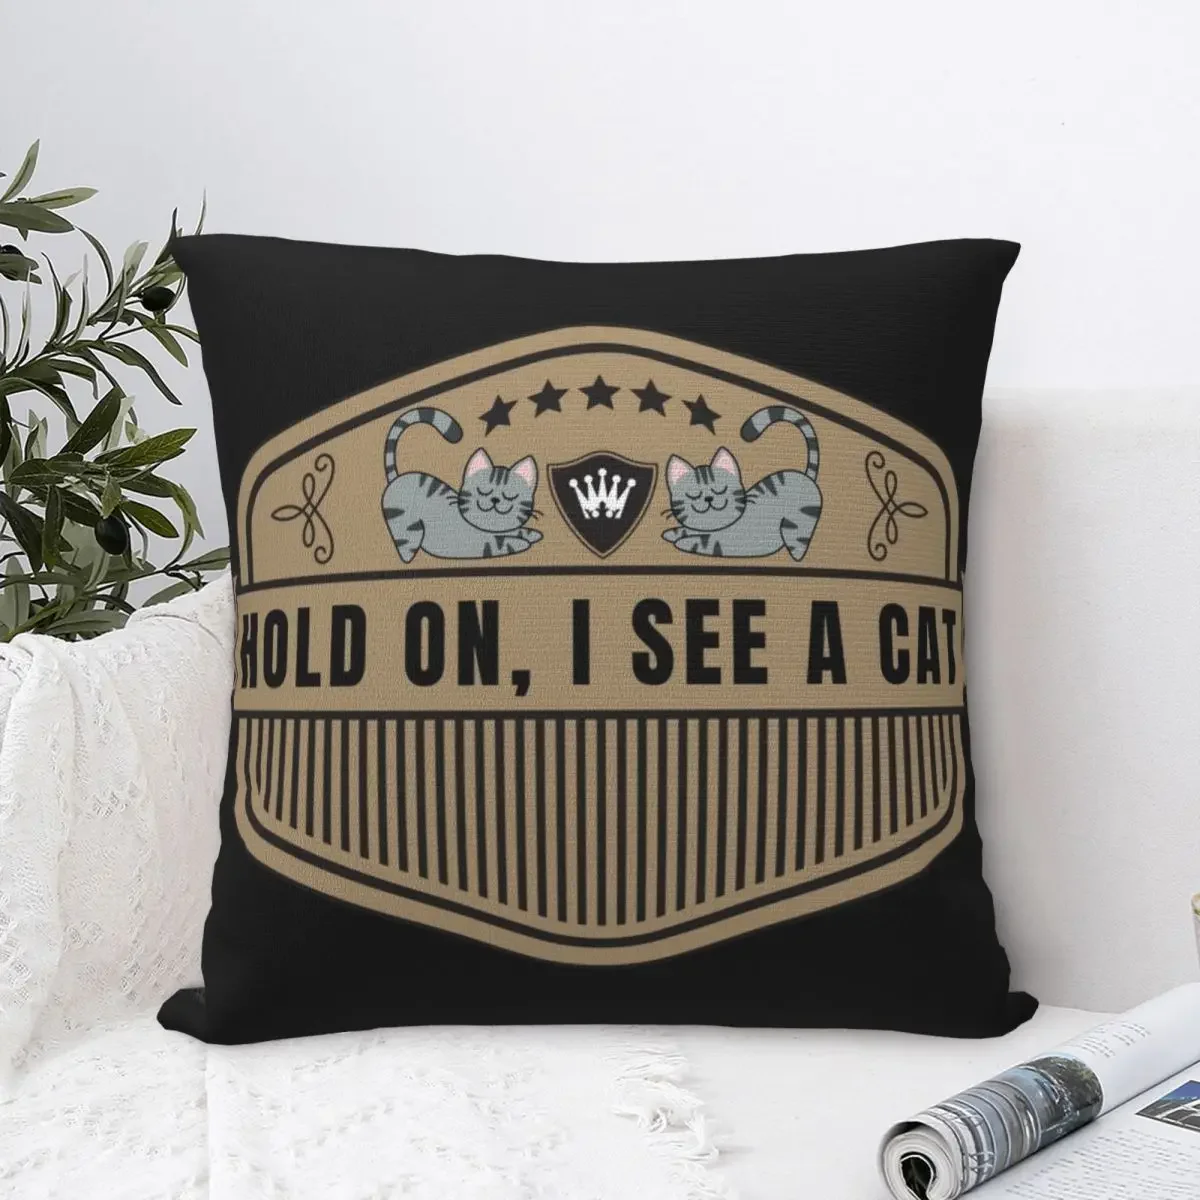 

Hold On, I See A Cat Square Pillowcase Cushion Cover Comfort Pillow Case Velvet Throw Pillow cover For Home Sofa Living Room